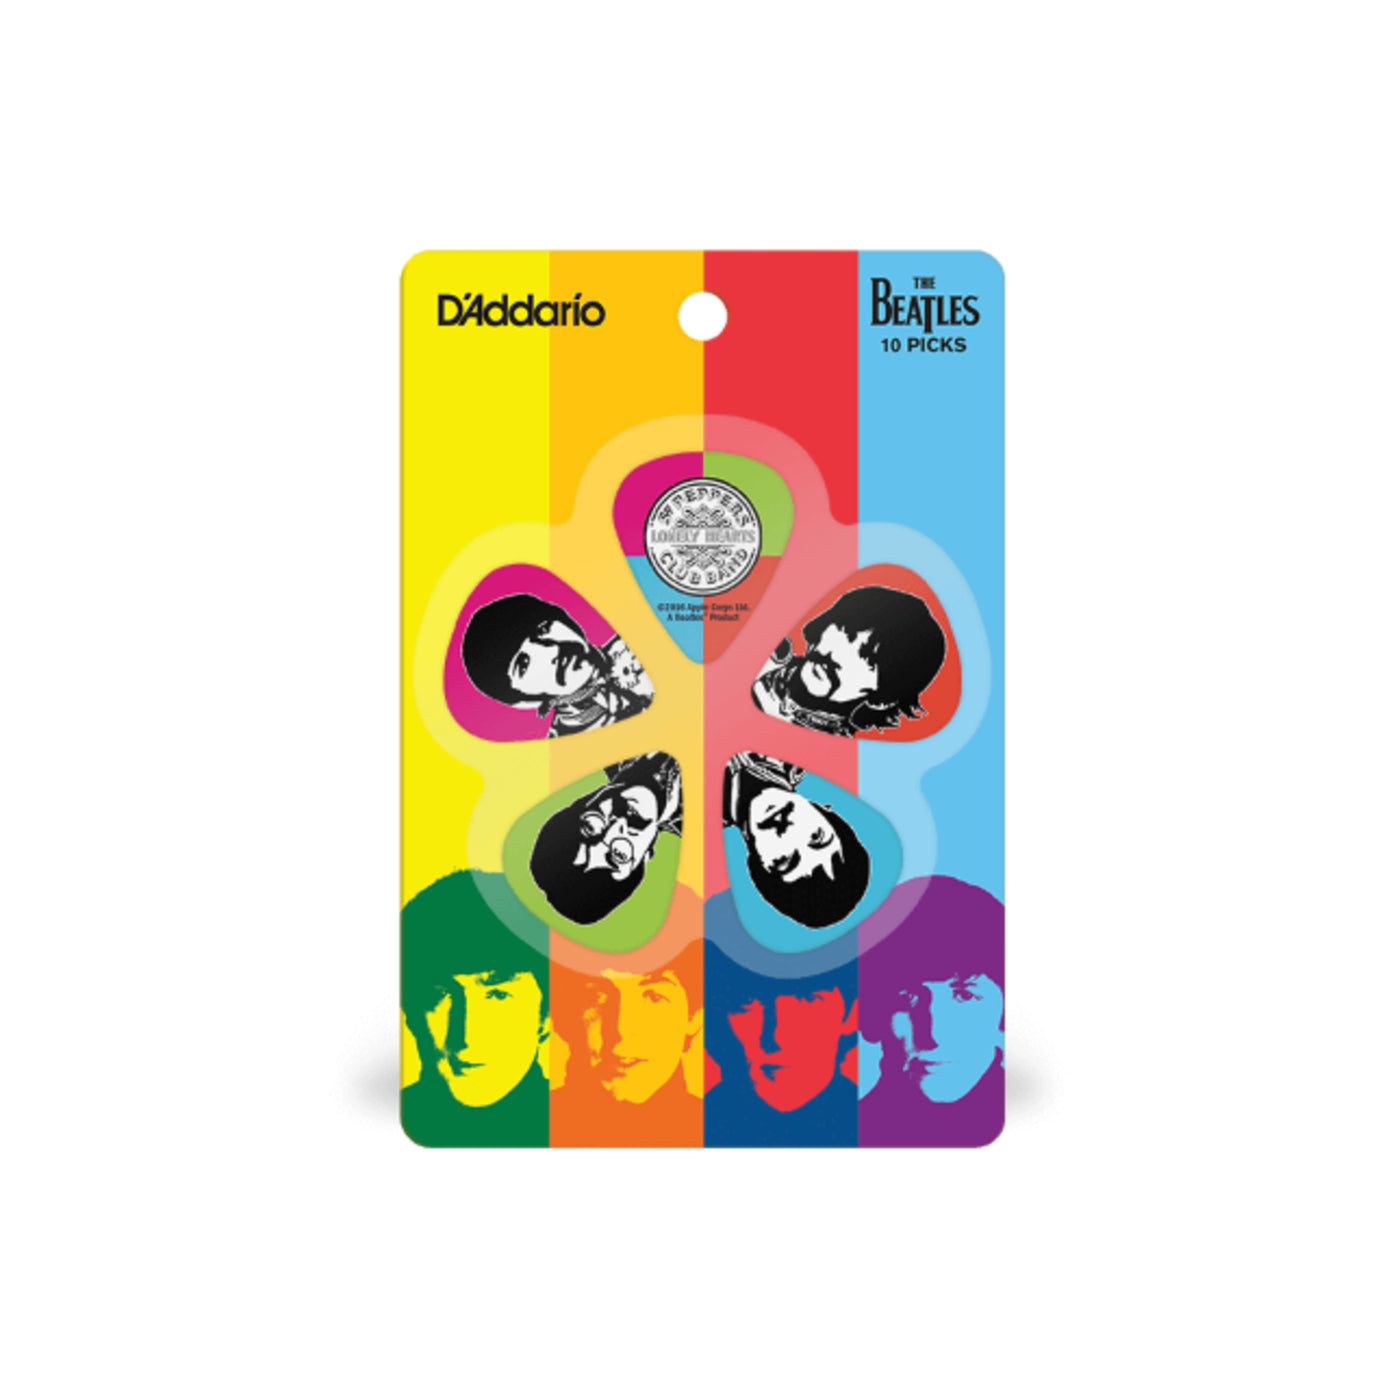 D'Addario Sgt. Pepper's Lonely Hearts Club Band 50th Anniversary Guitar Picks, 10 Pack, Heavy Gauge (1CWH6-10B6)